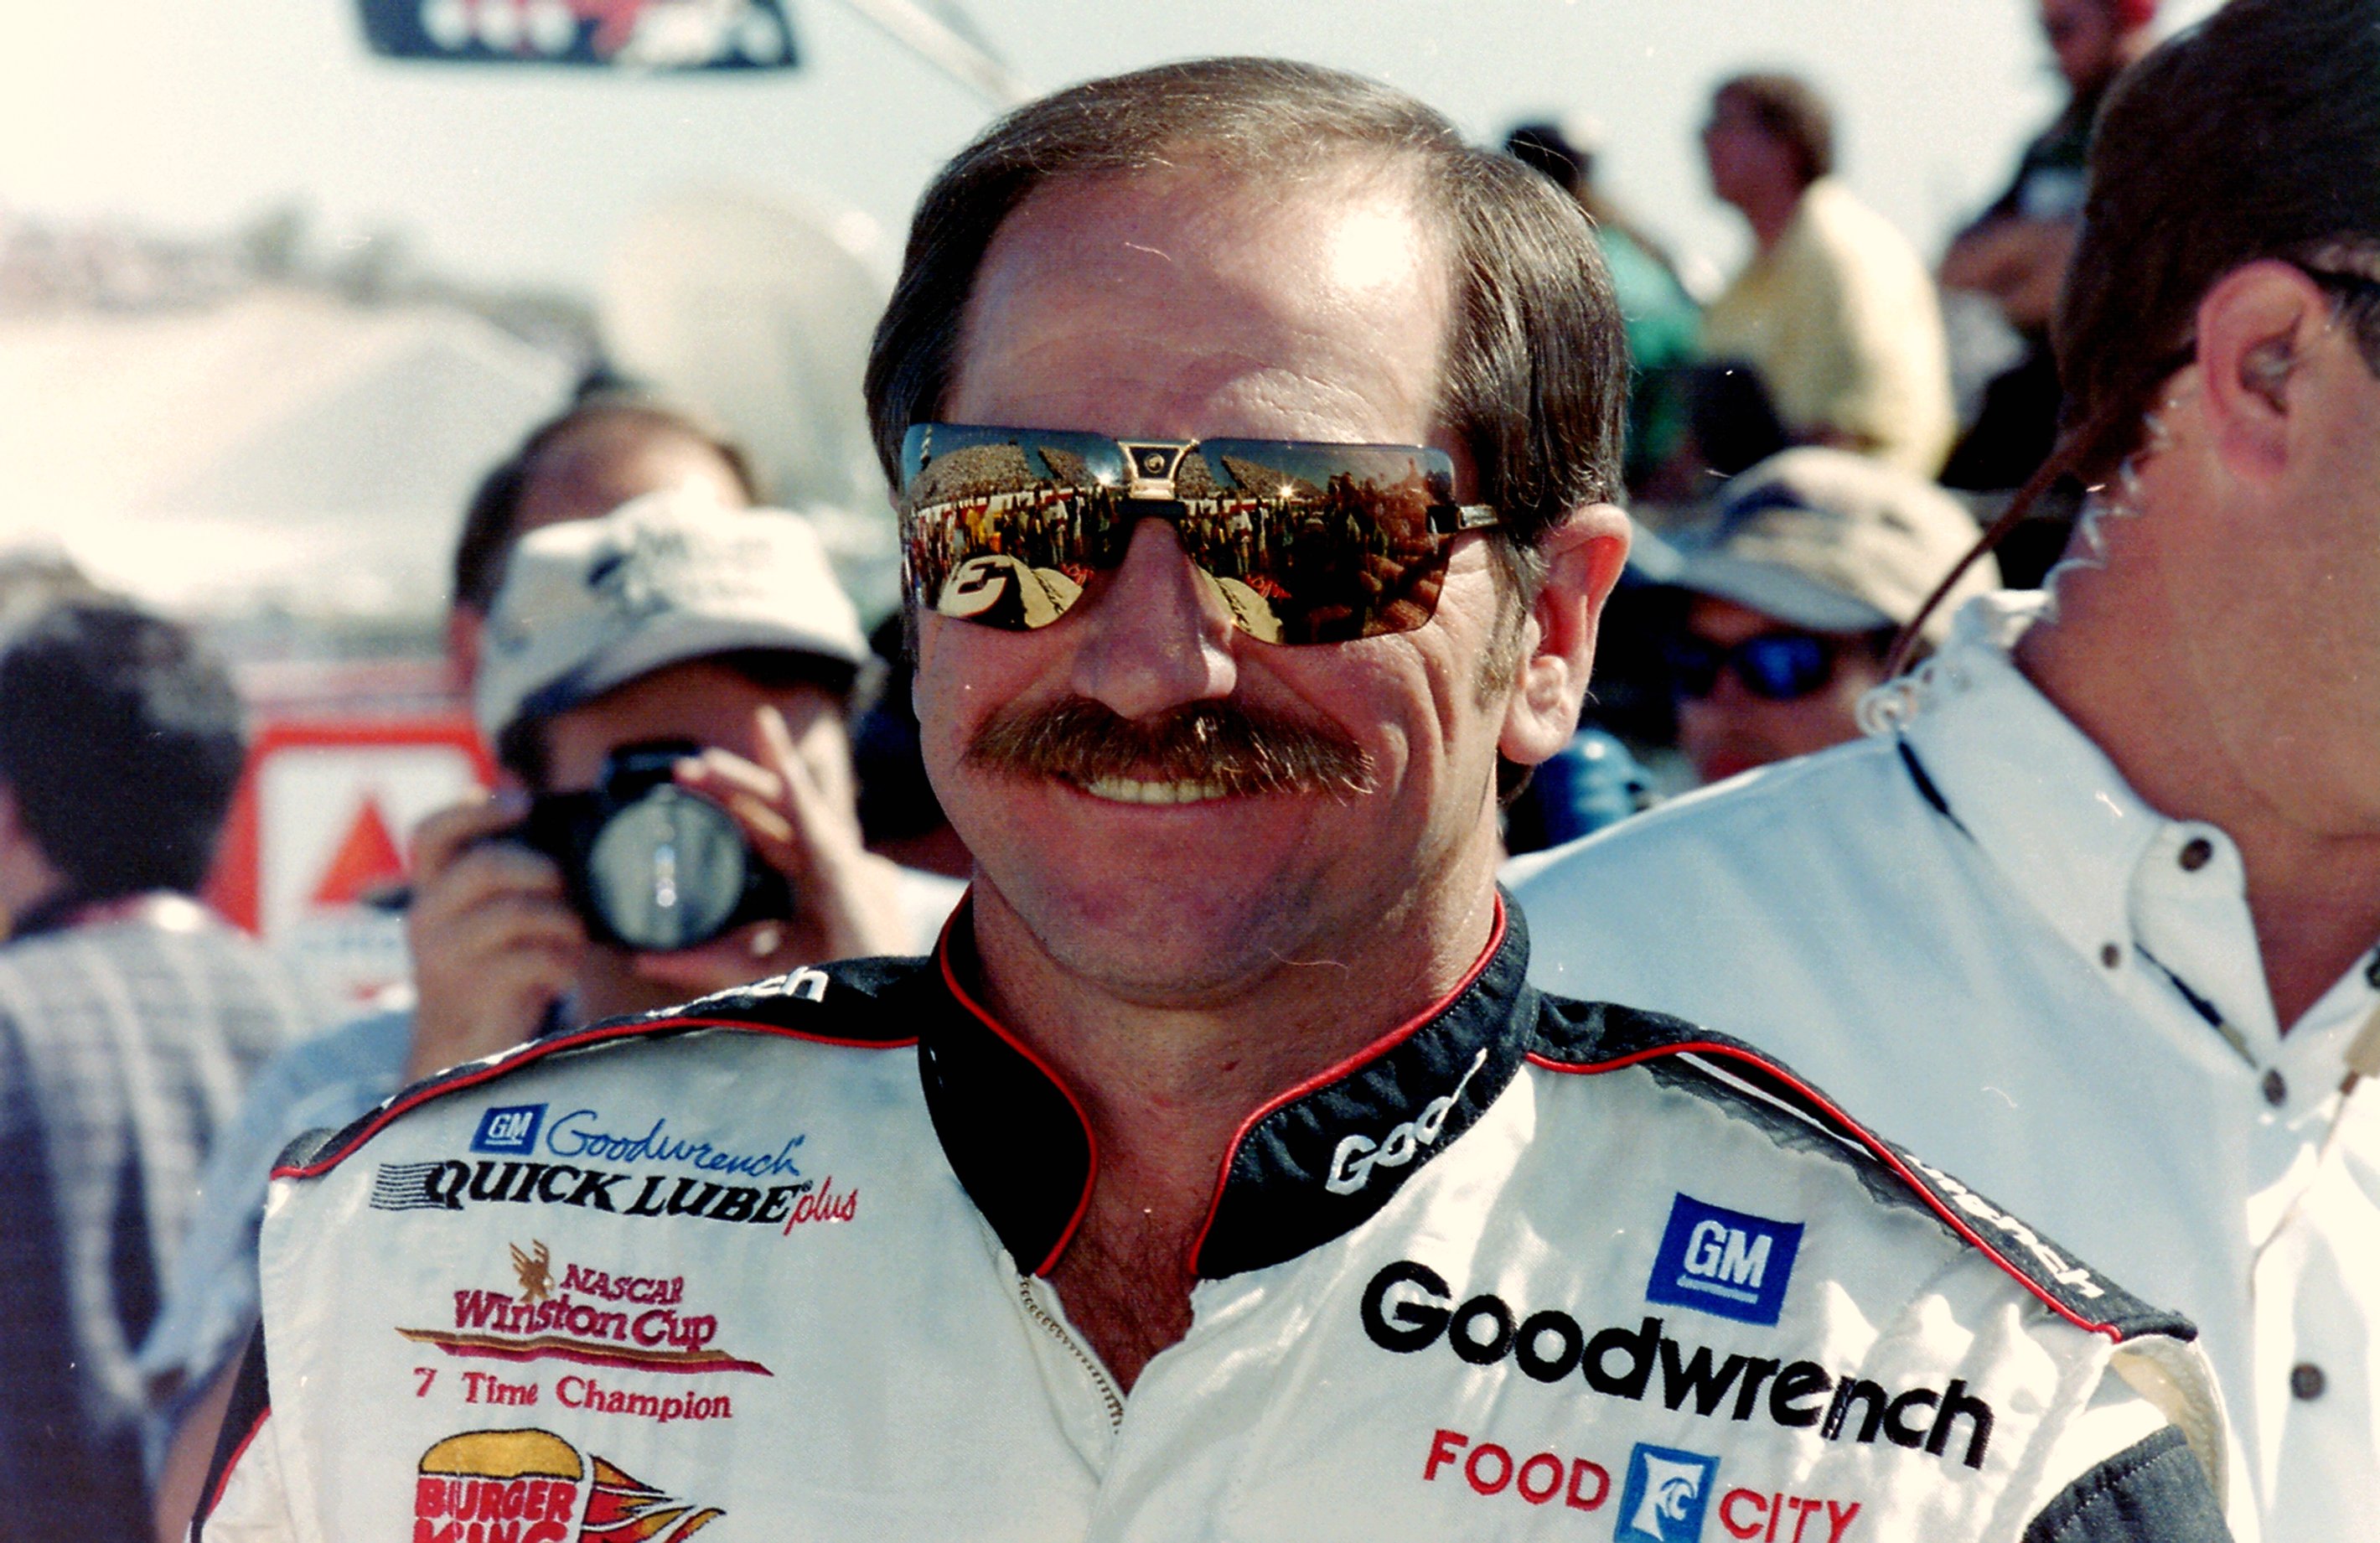 Remember That Time Dale Earnhardt Broke His Hand on a Poacher's Face